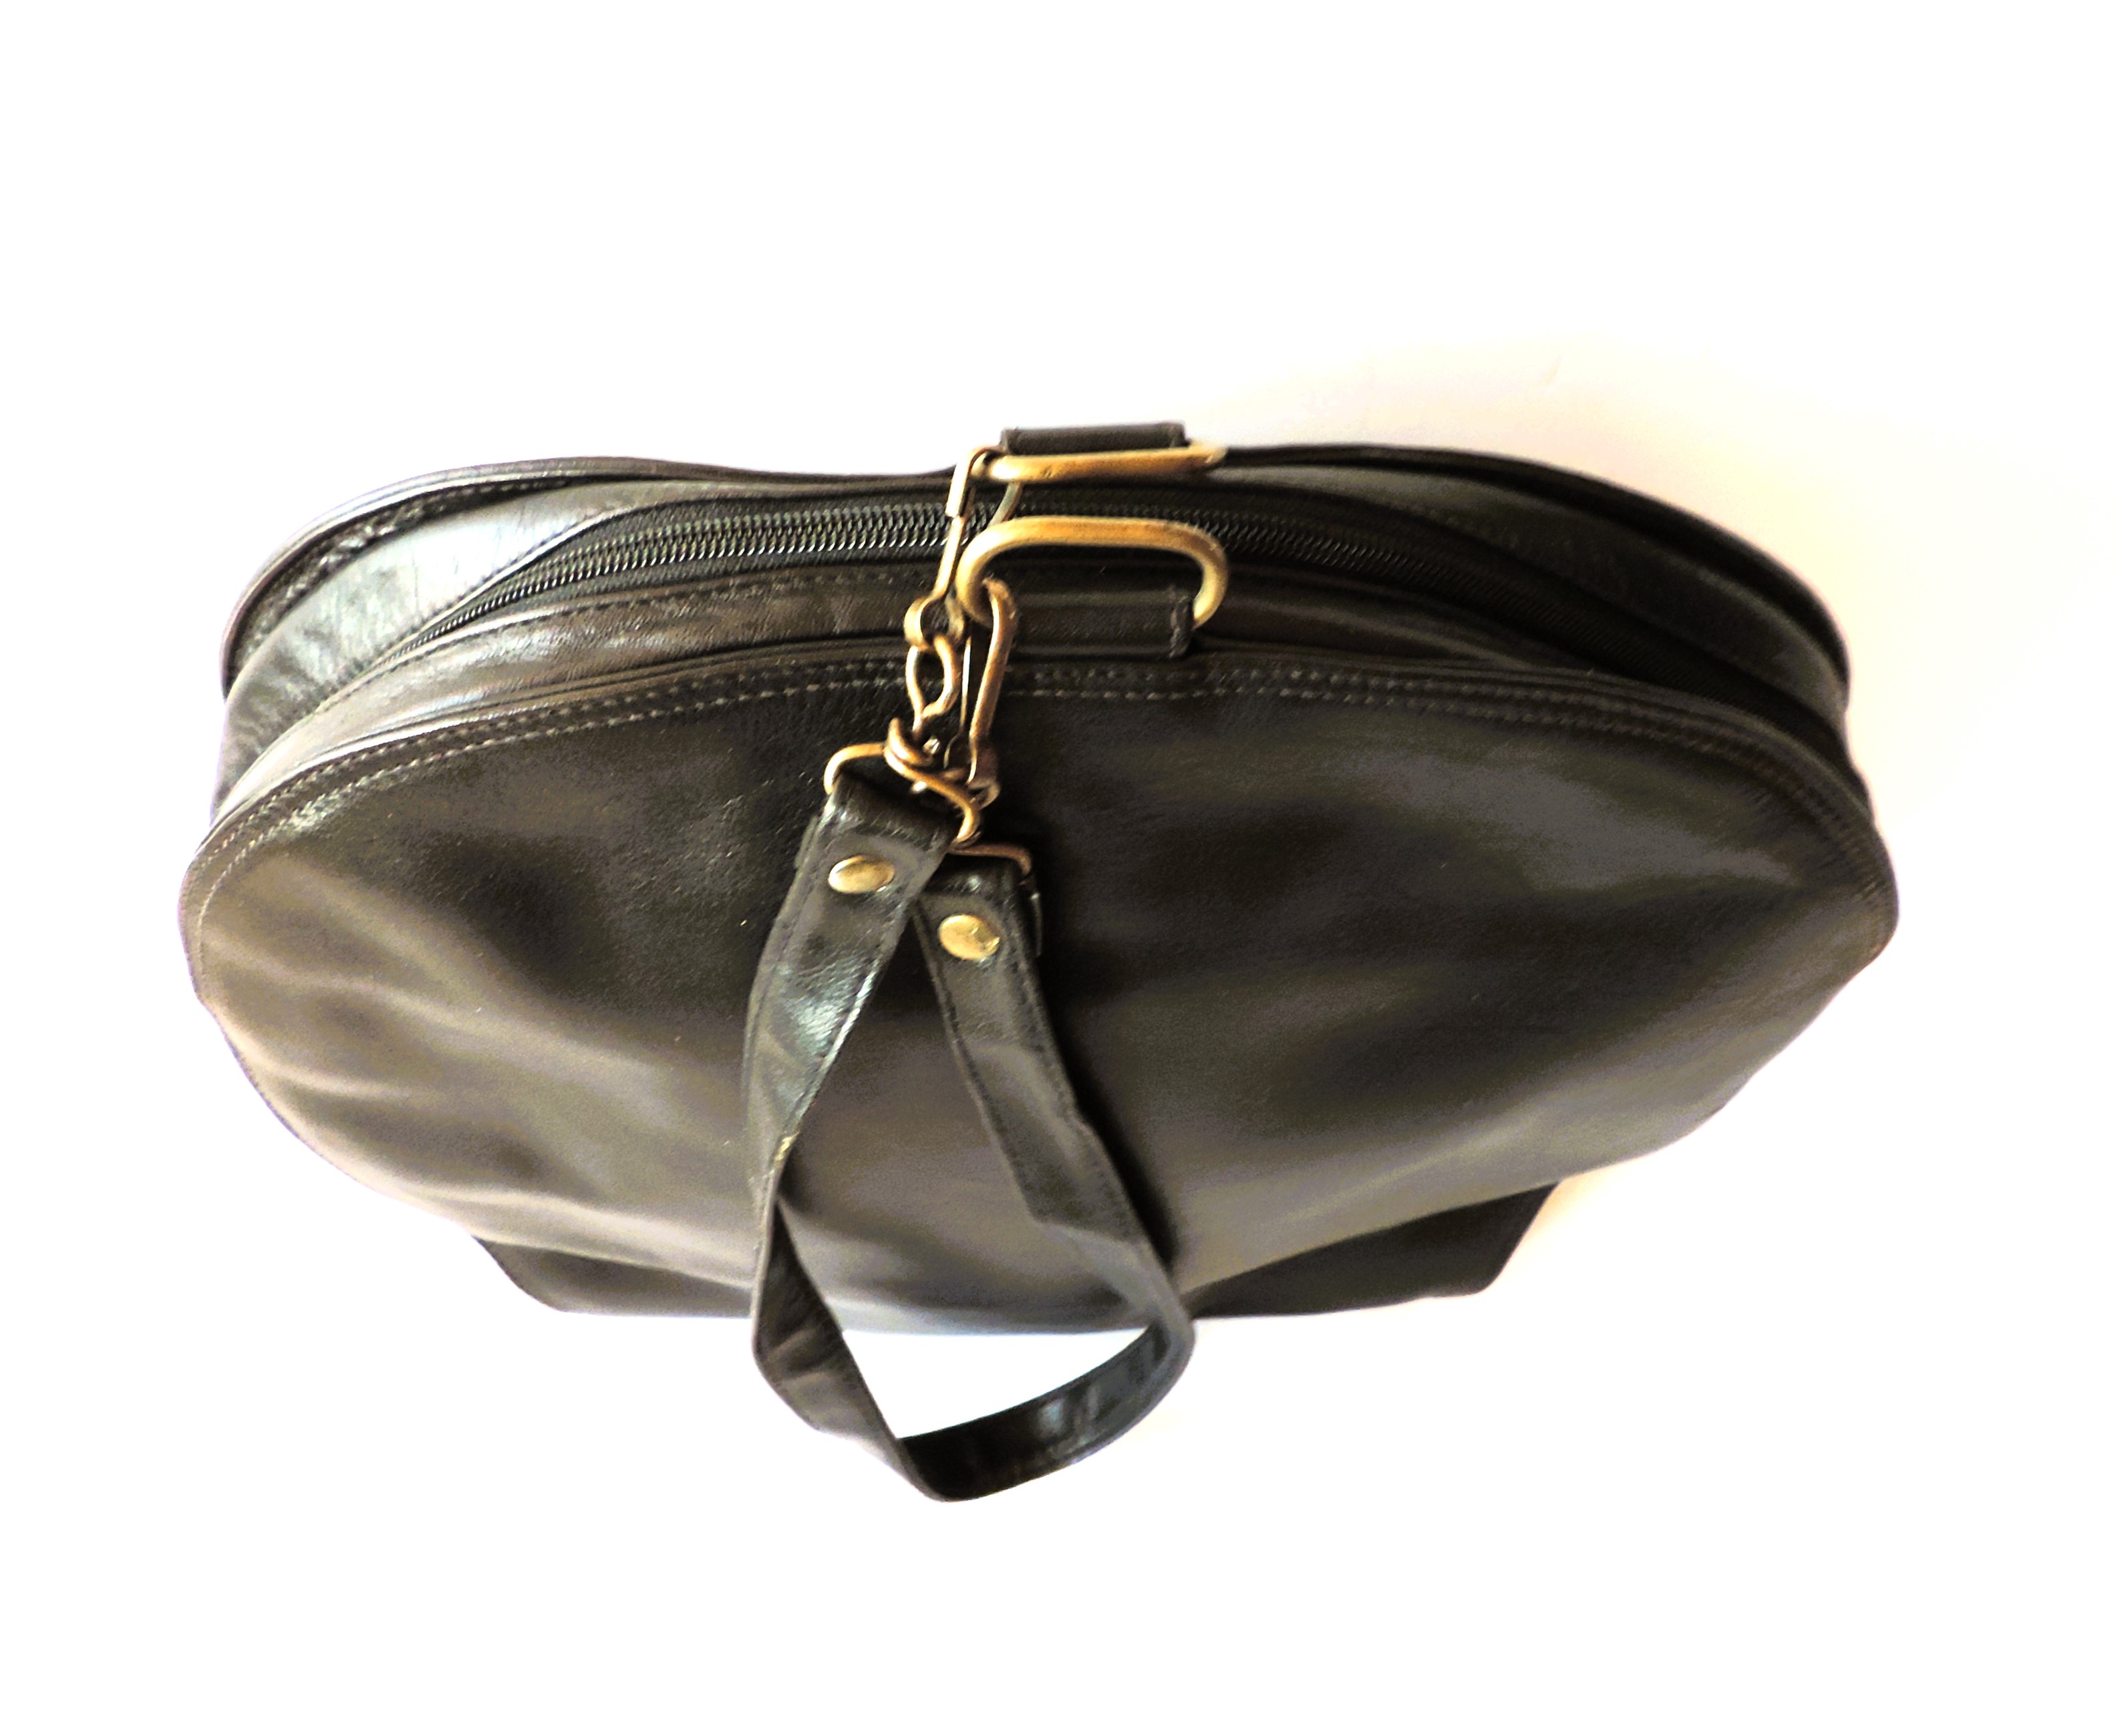 Made in Italy Black Leather Bag - Image 4 of 8